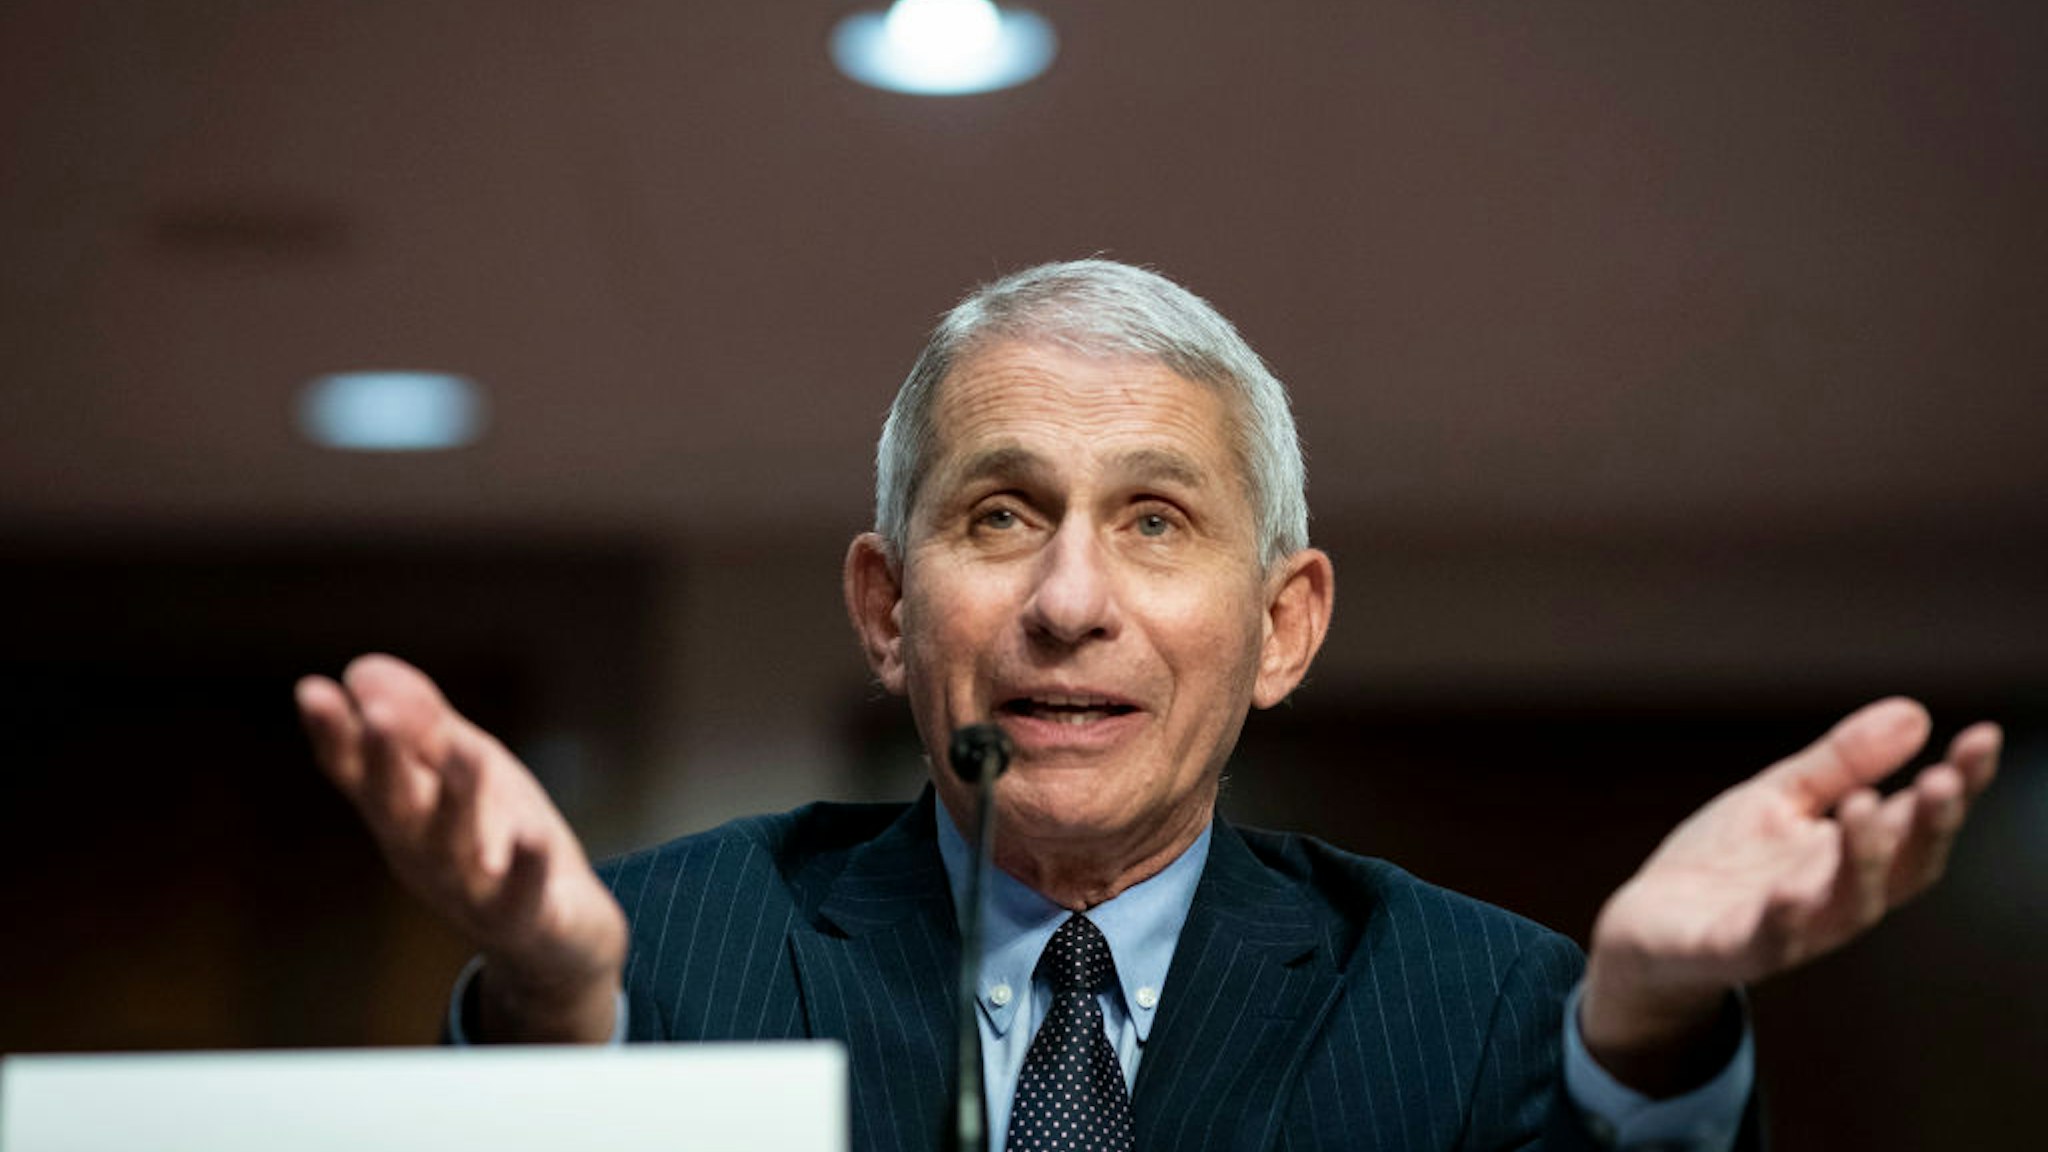 WASHINGTON, DC - JUNE 30: Dr. Anthony Fauci, director of the National Institute of Allergy and Infectious Diseases, speaks during a Senate Health, Education, Labor and Pensions Committee hearing on June 30, 2020 in Washington, DC. Top federal health officials discussed efforts for safely getting back to work and school during the coronavirus pandemic.